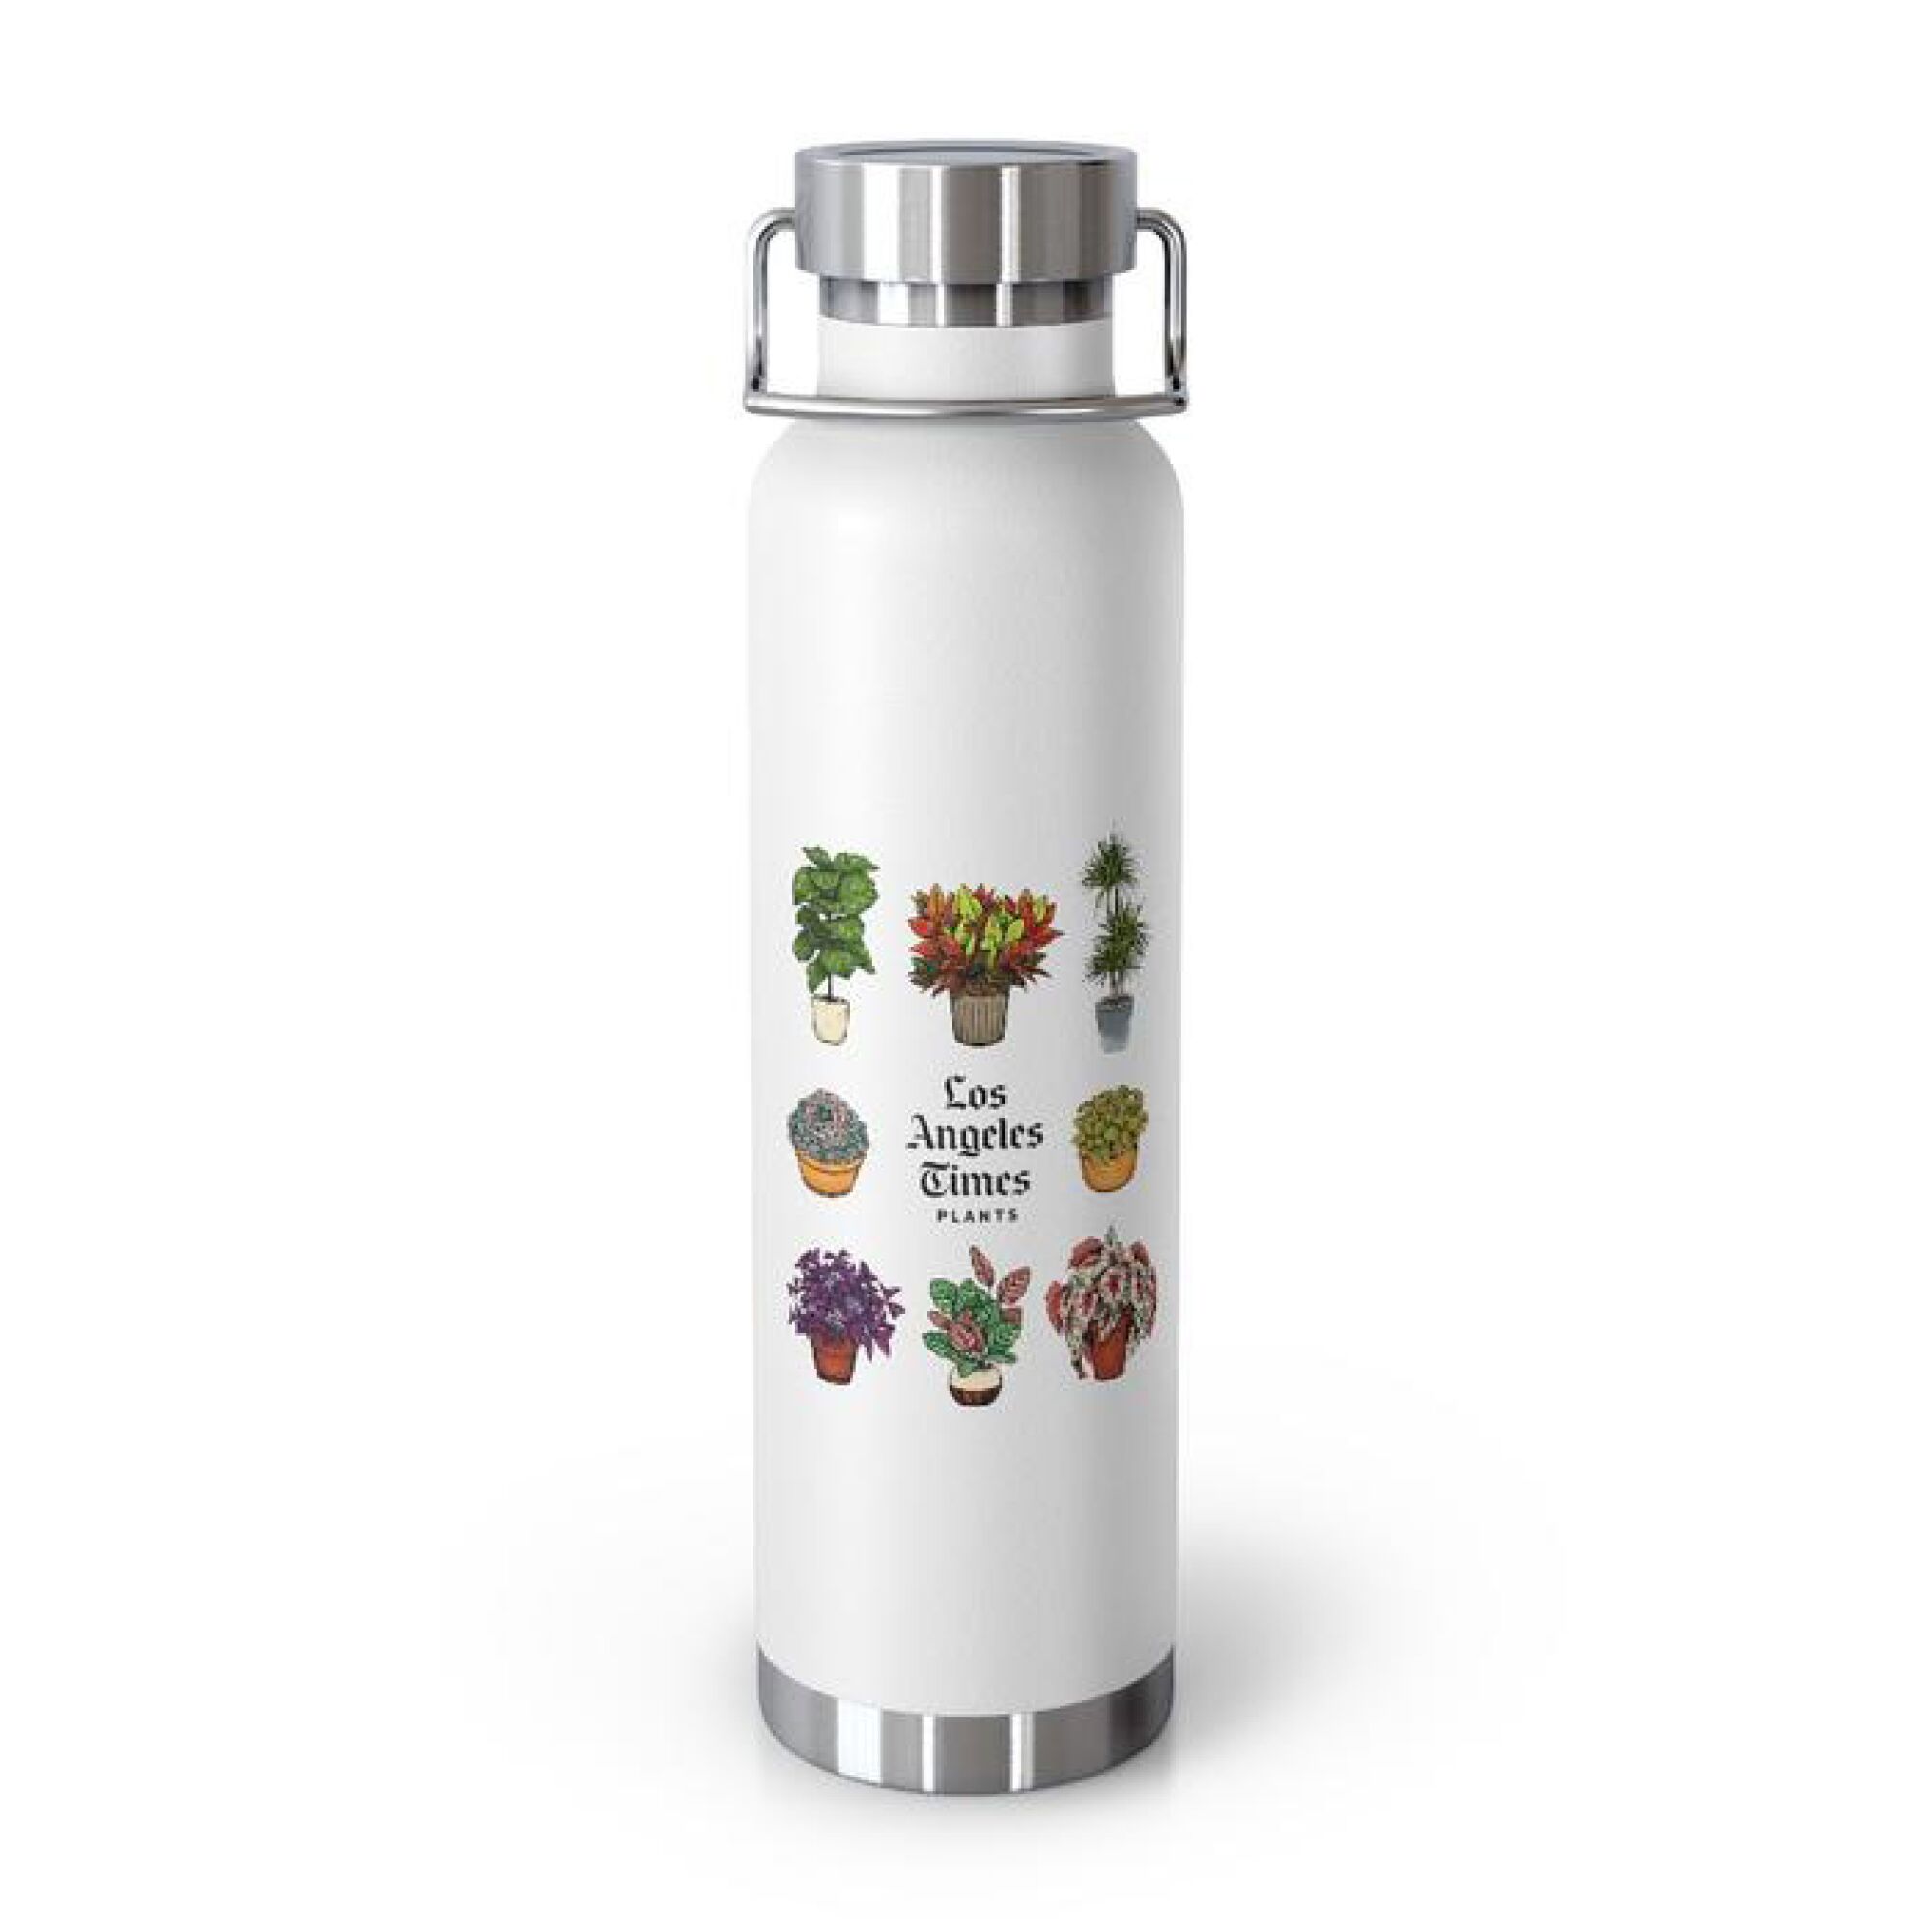 A water bottle with images of plants on it, plus the Los Angeles Times logo.